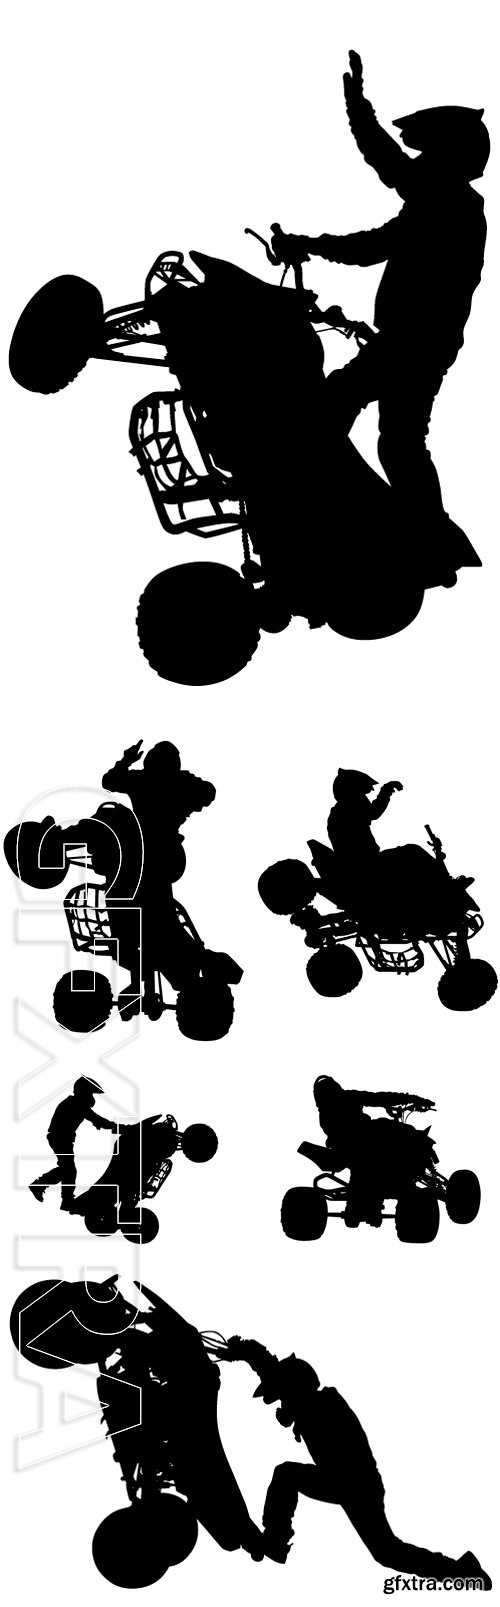 Stock Vectors - Silhouettes athletes ATV during races on white background